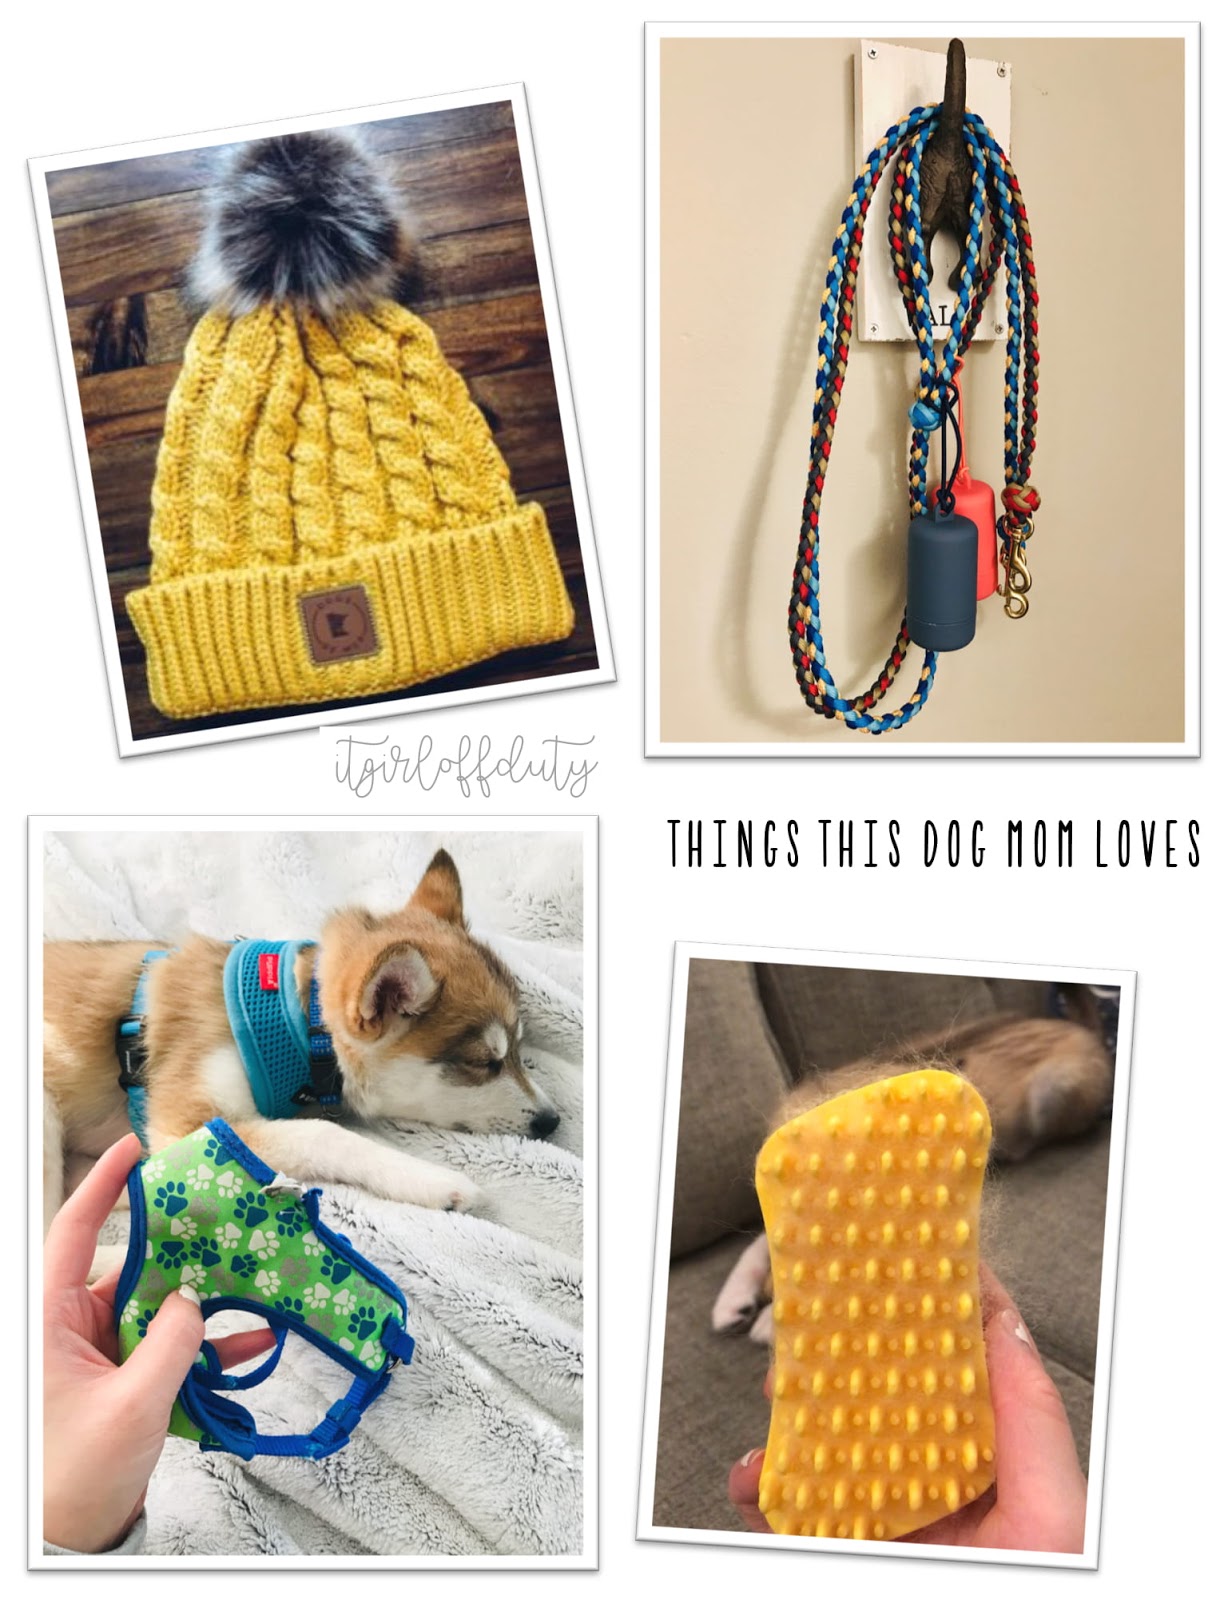 Knitting things for dogs